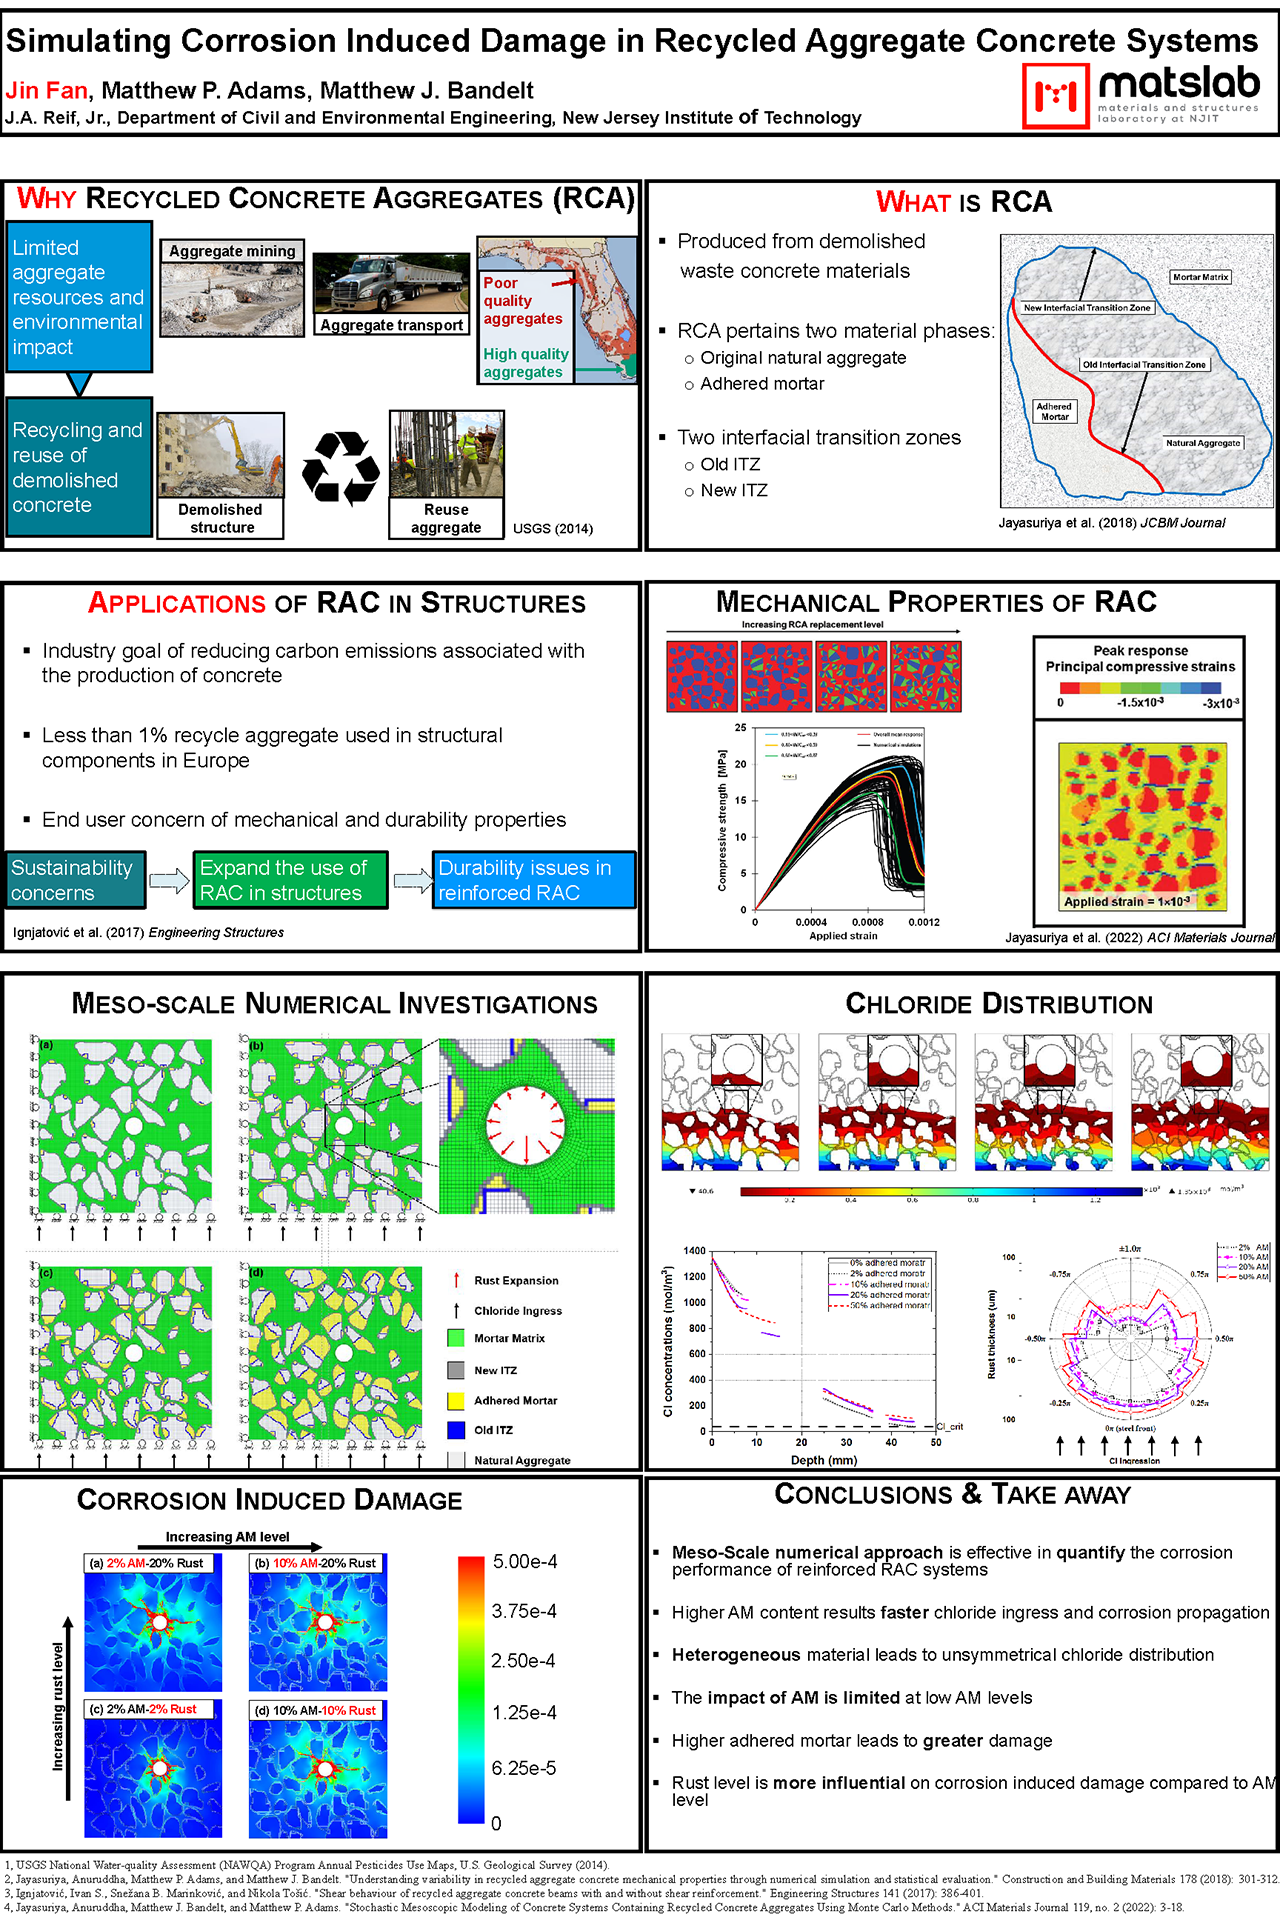 Poster_Simulating Corrosion Induced Damage in Recycled Aggregate Concrete Systems